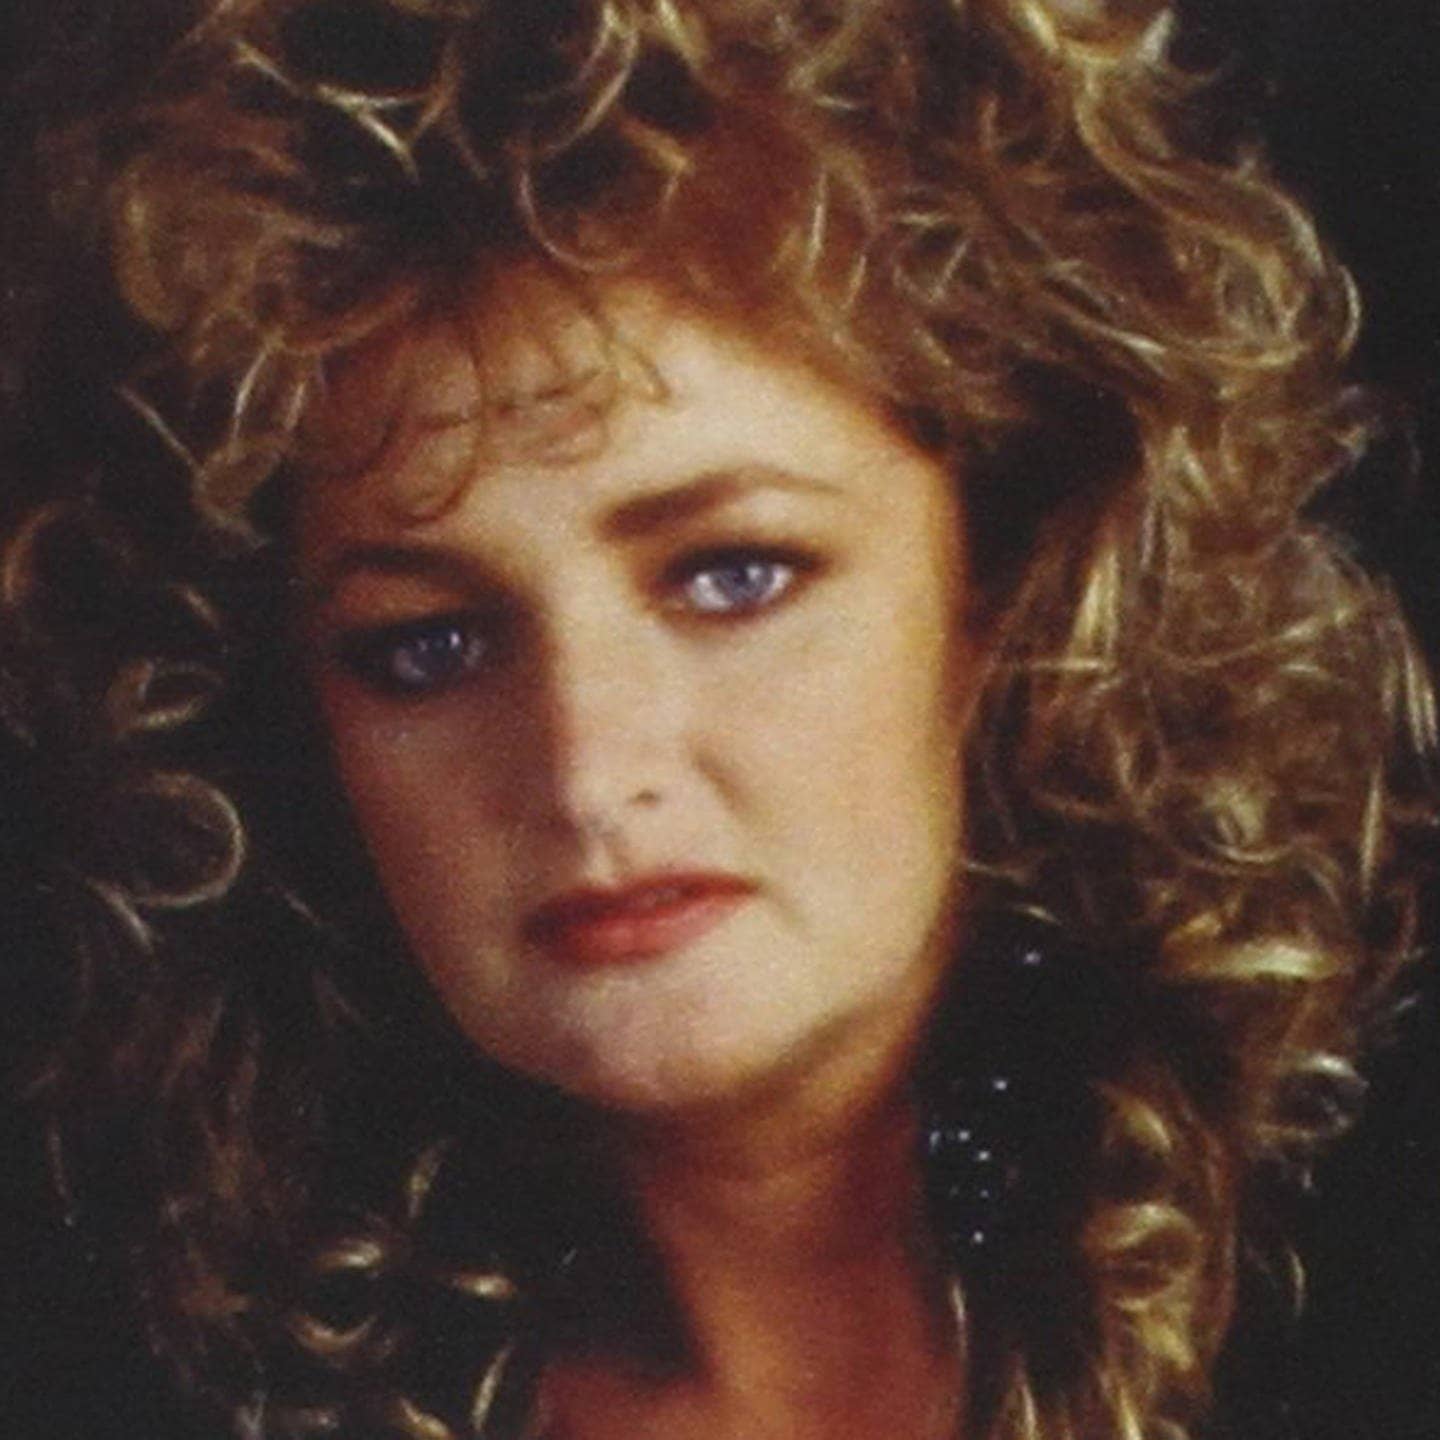 Total Eclipse Of The Heart – Bonnie Tyler